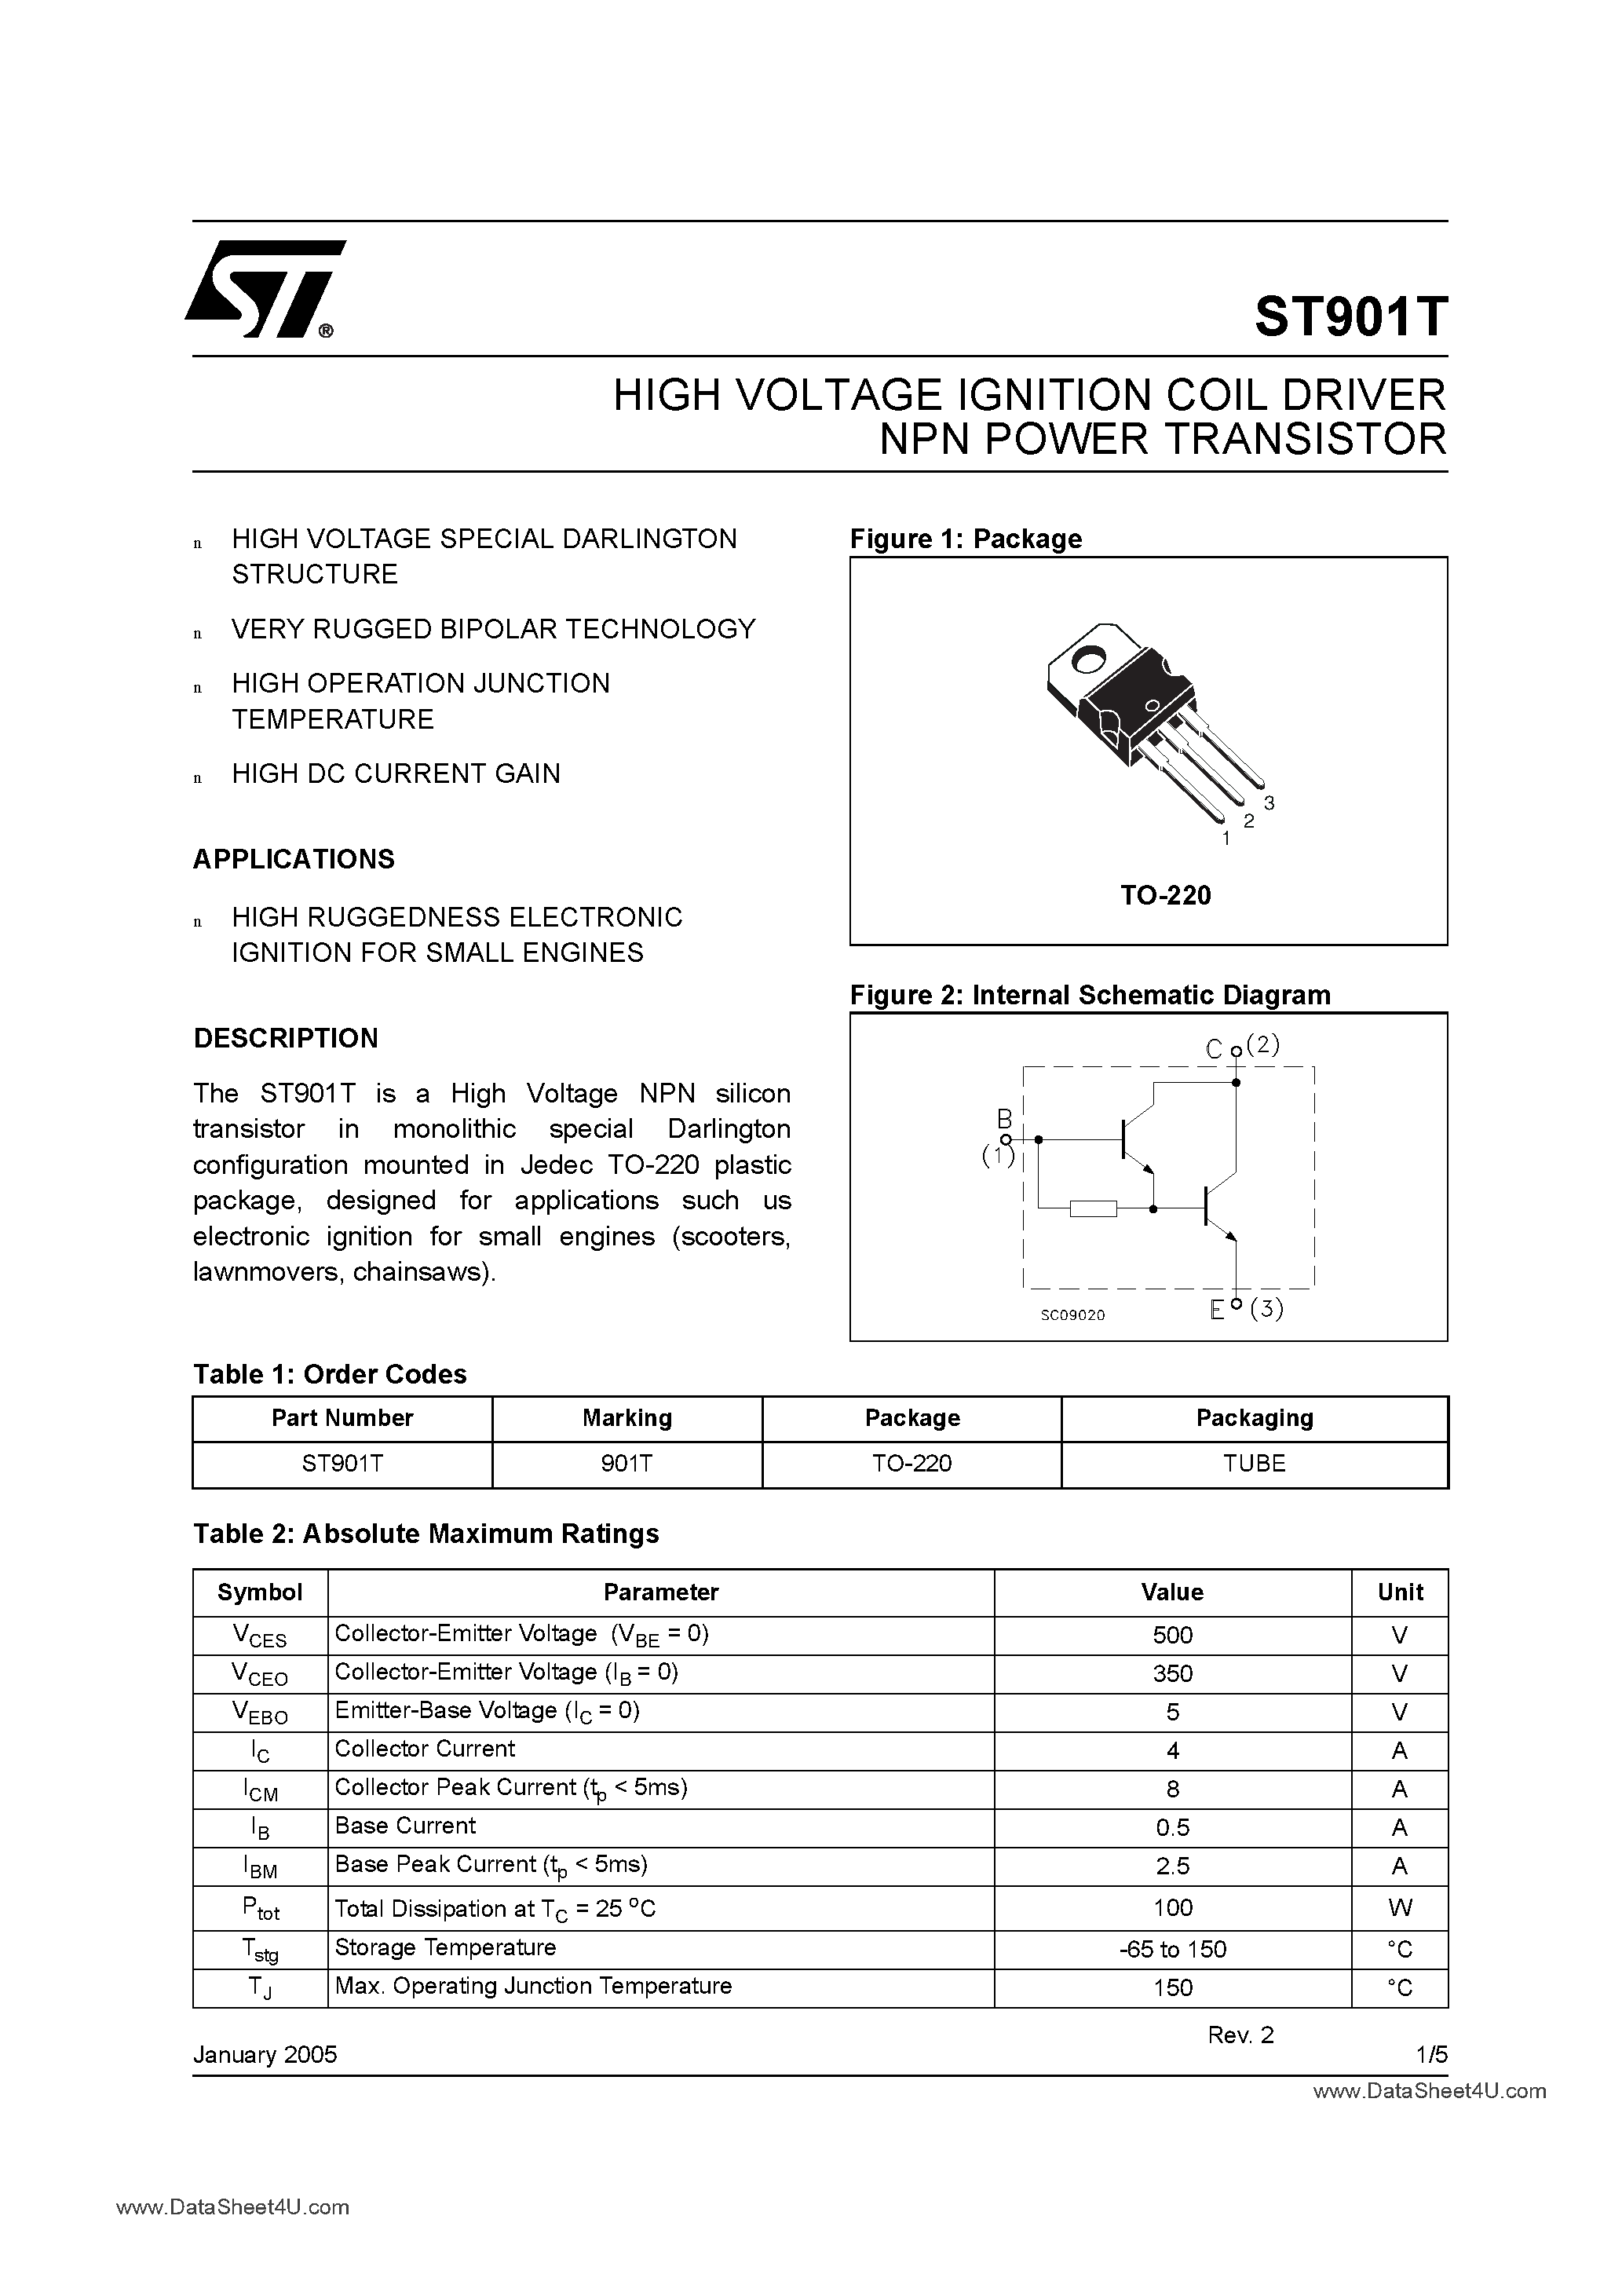 Datasheet ST901T - HIGH VOLTAGE IGNITION COIL DRIVER NPN POWER DARLINGTON page 1